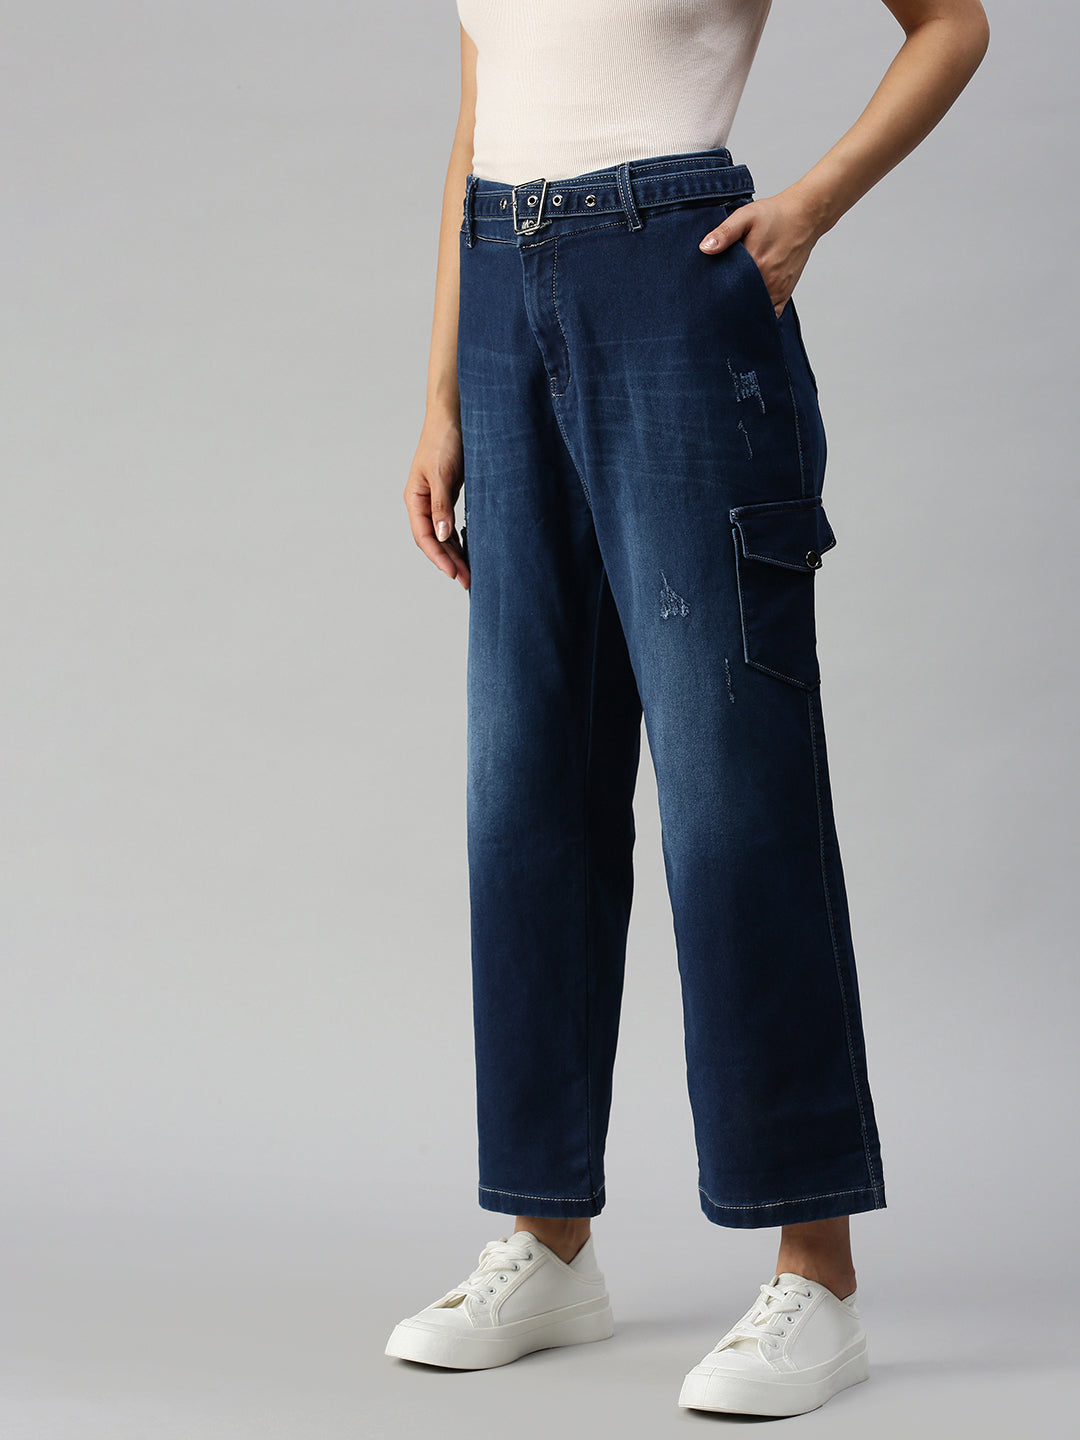 Women's Blue Solid Relaxed Fit Denim Jeans